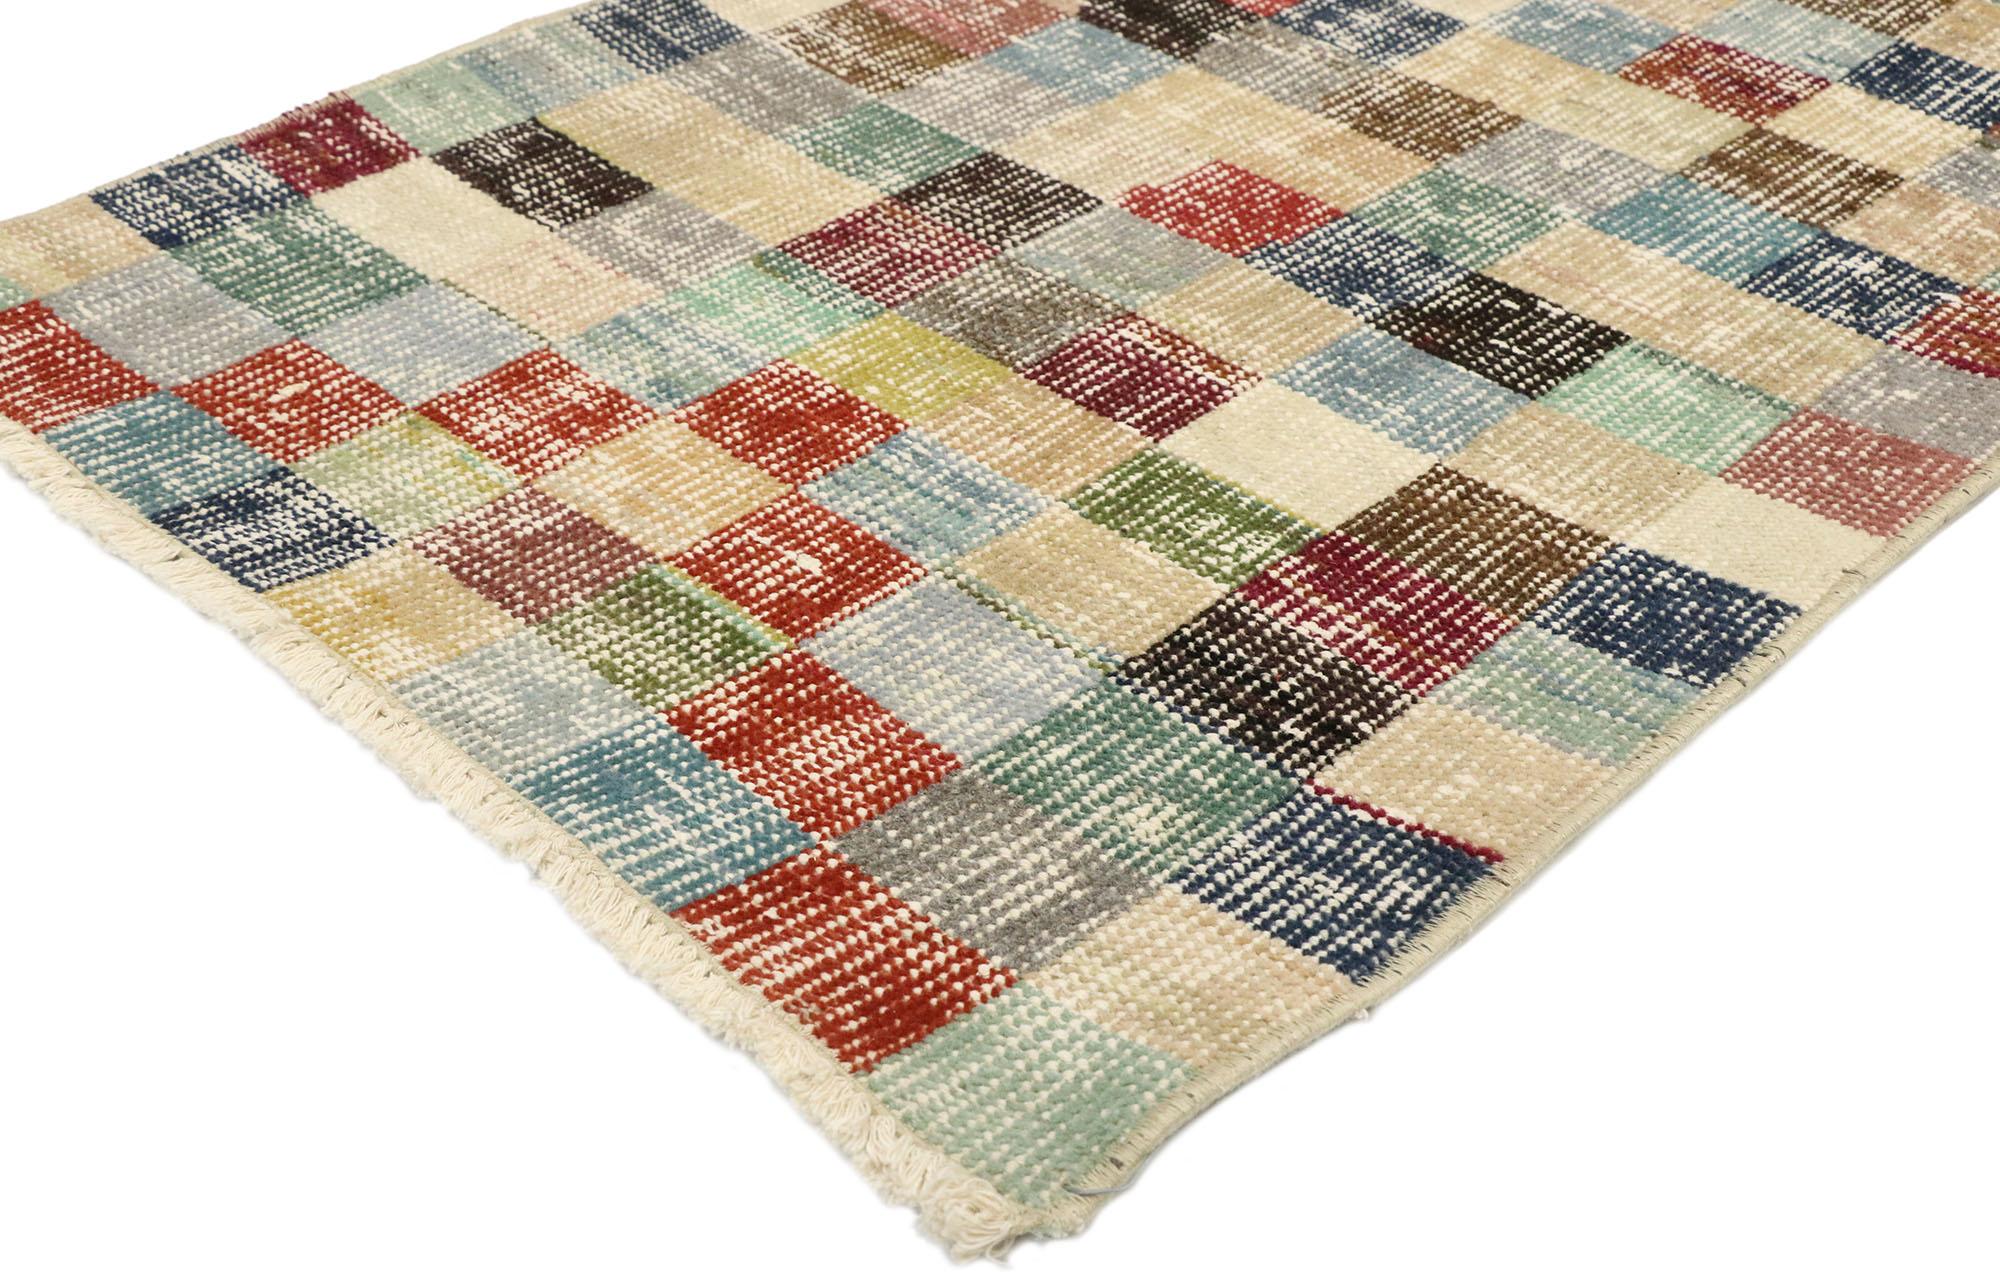 51895, Zeki Muren distressed vintage Turkish Sivas rug with Industrial Postmodern Cubism style. The versatility of this rug lies in its simple, colorful checkerboard design. Whether running along a hallway in an Amish style farmhouse or along a